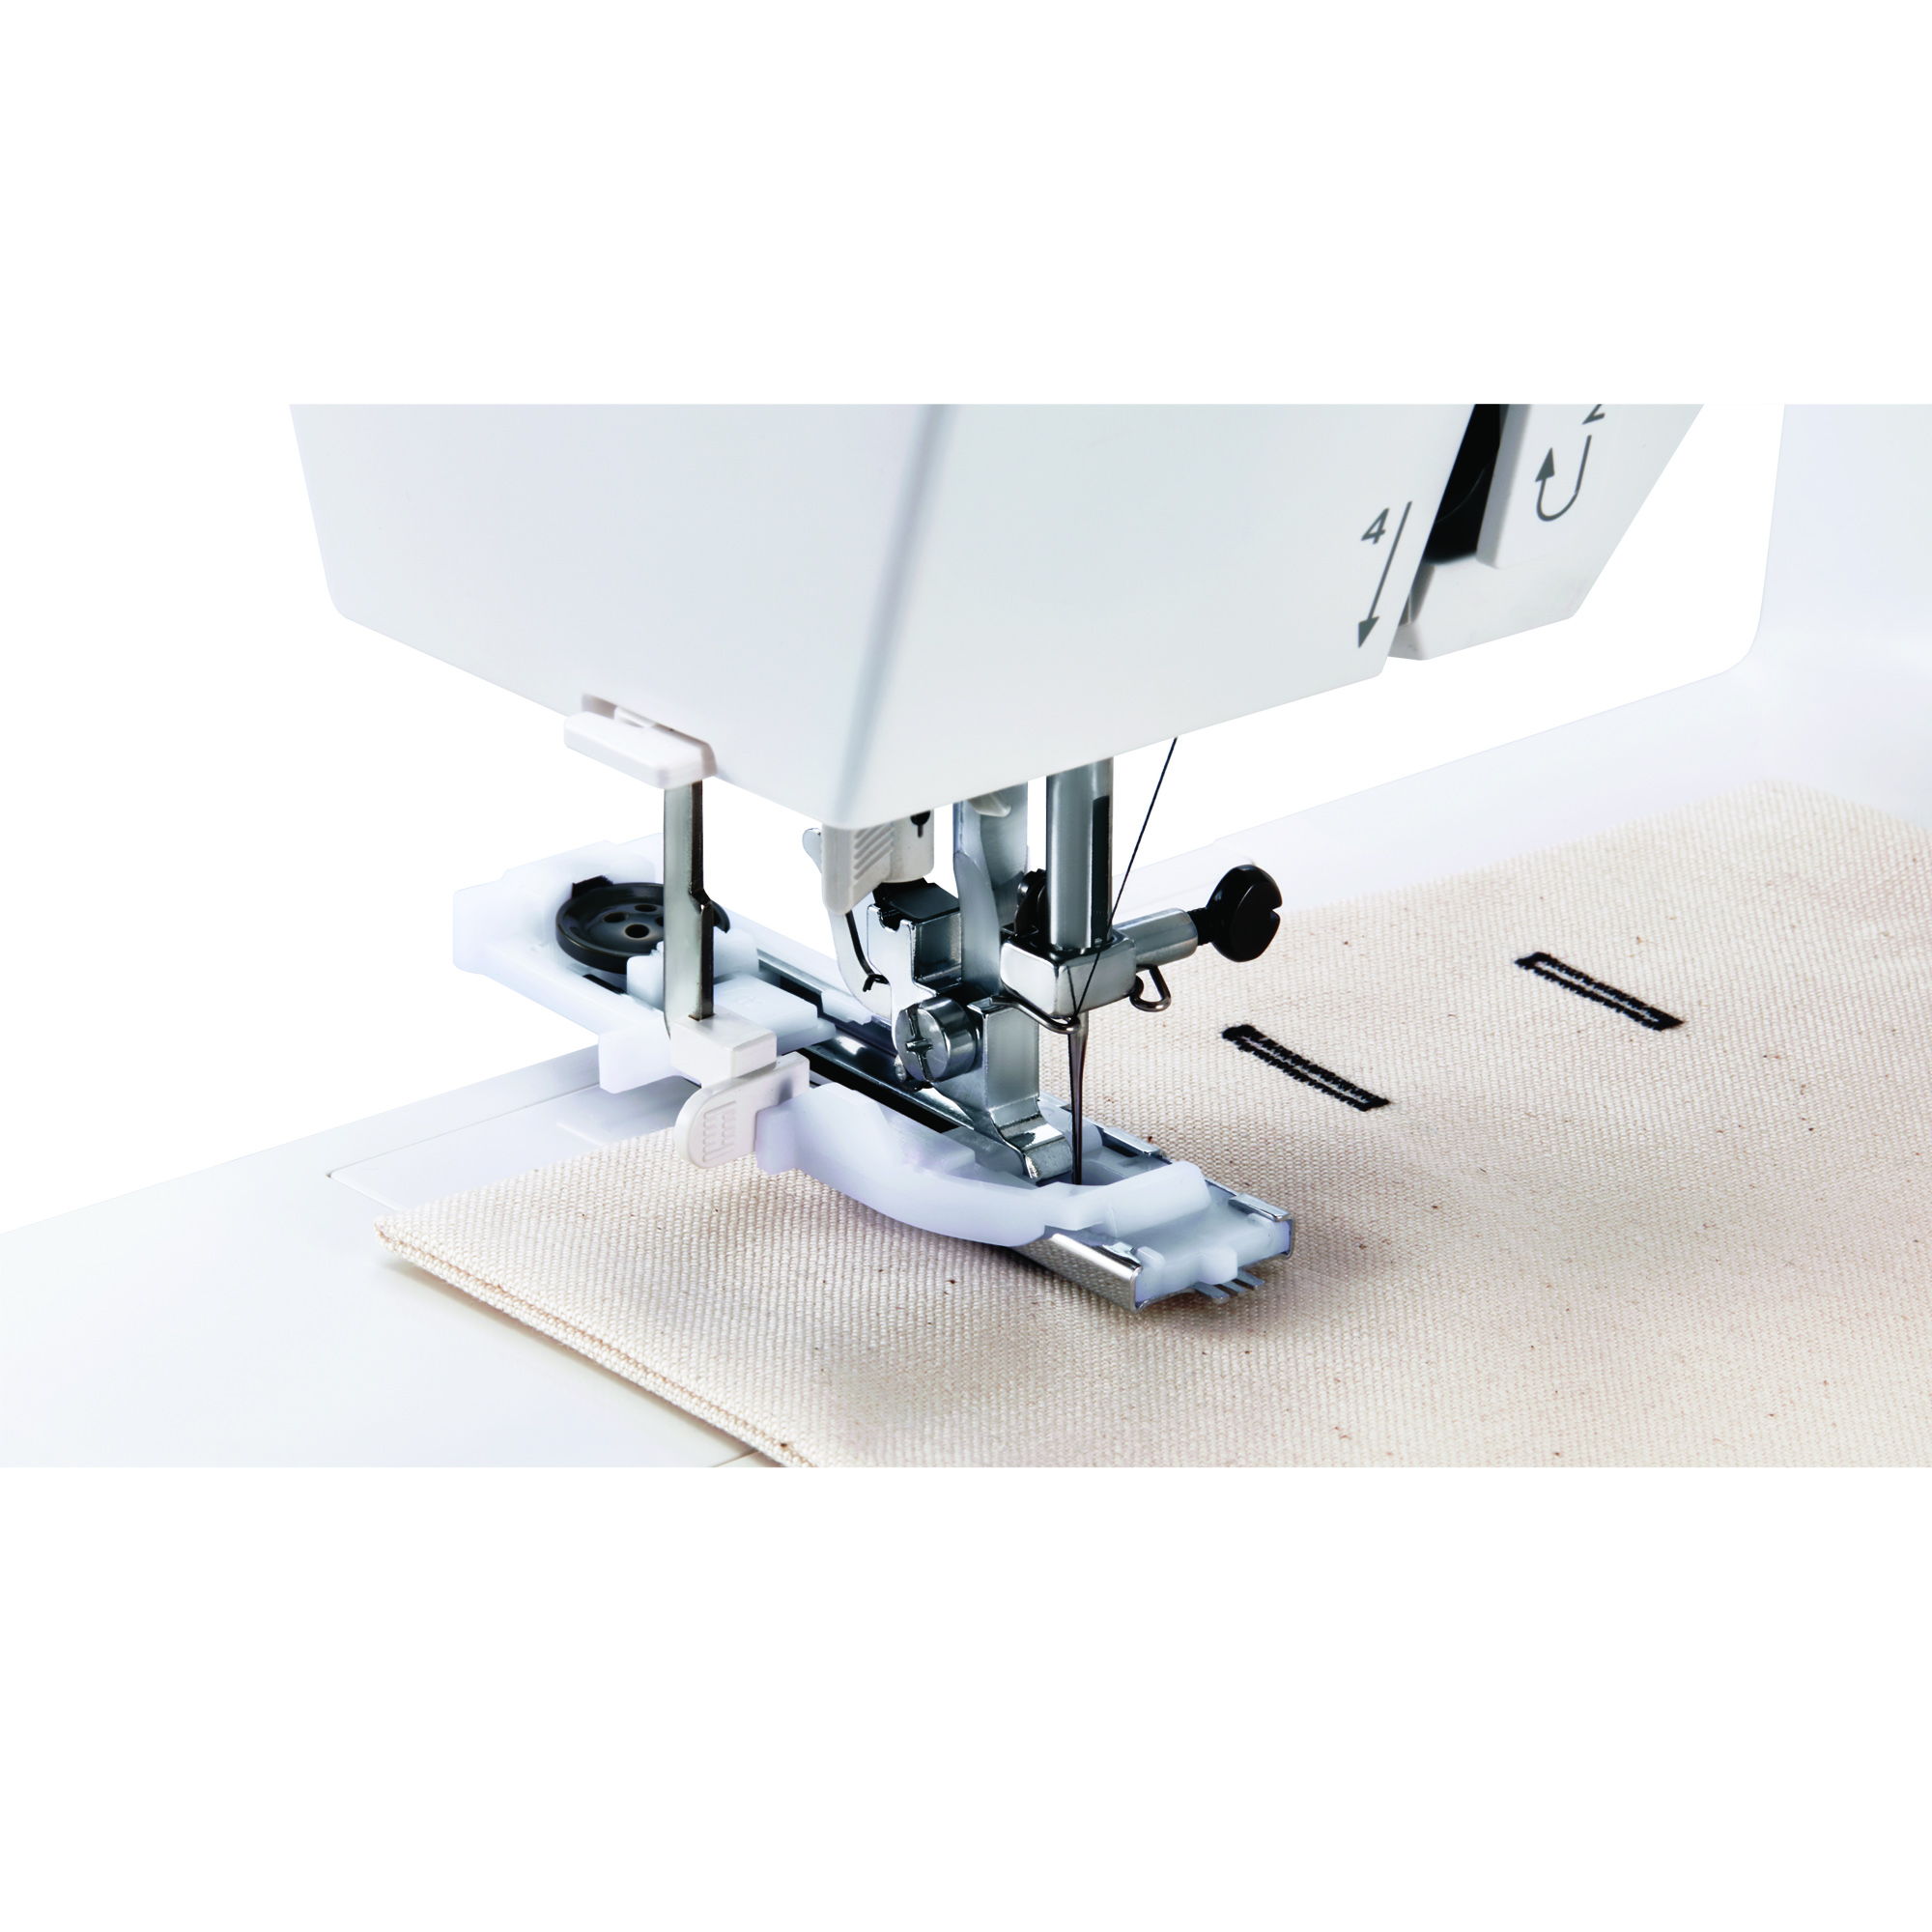 Janome Rotary Even Wide Rolled Hem Attachment Sewing Feet spares